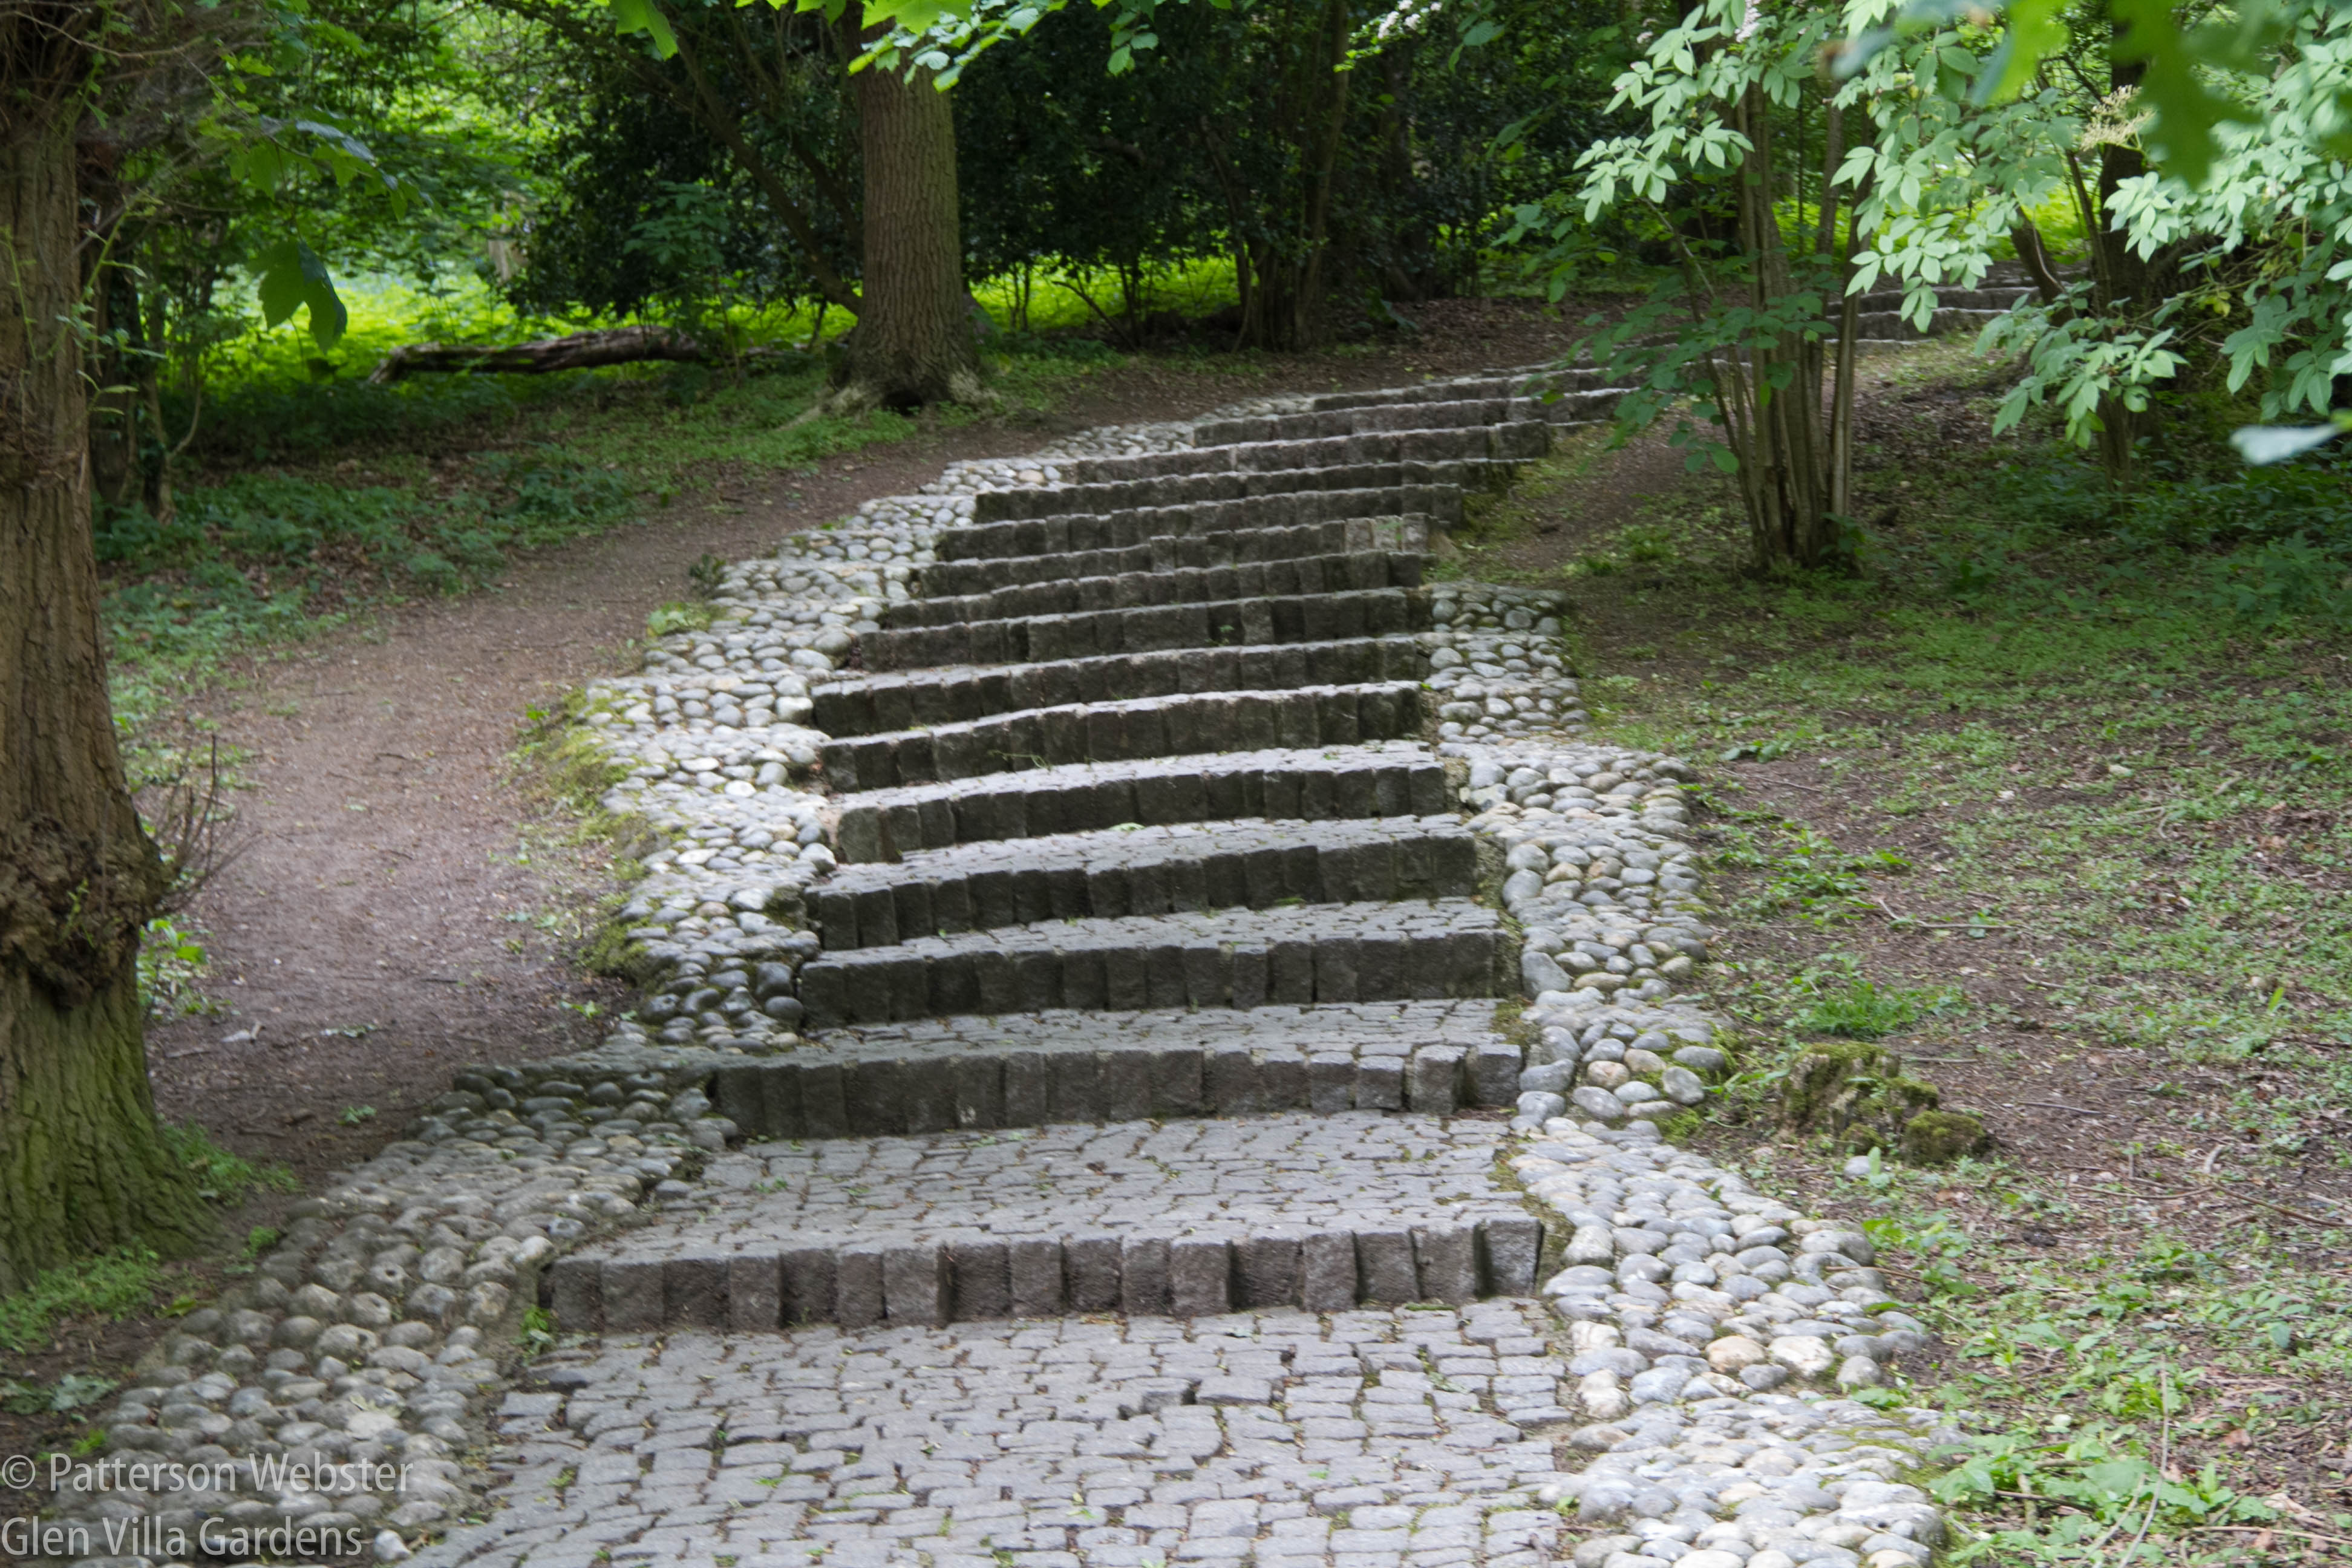 The steps are also 